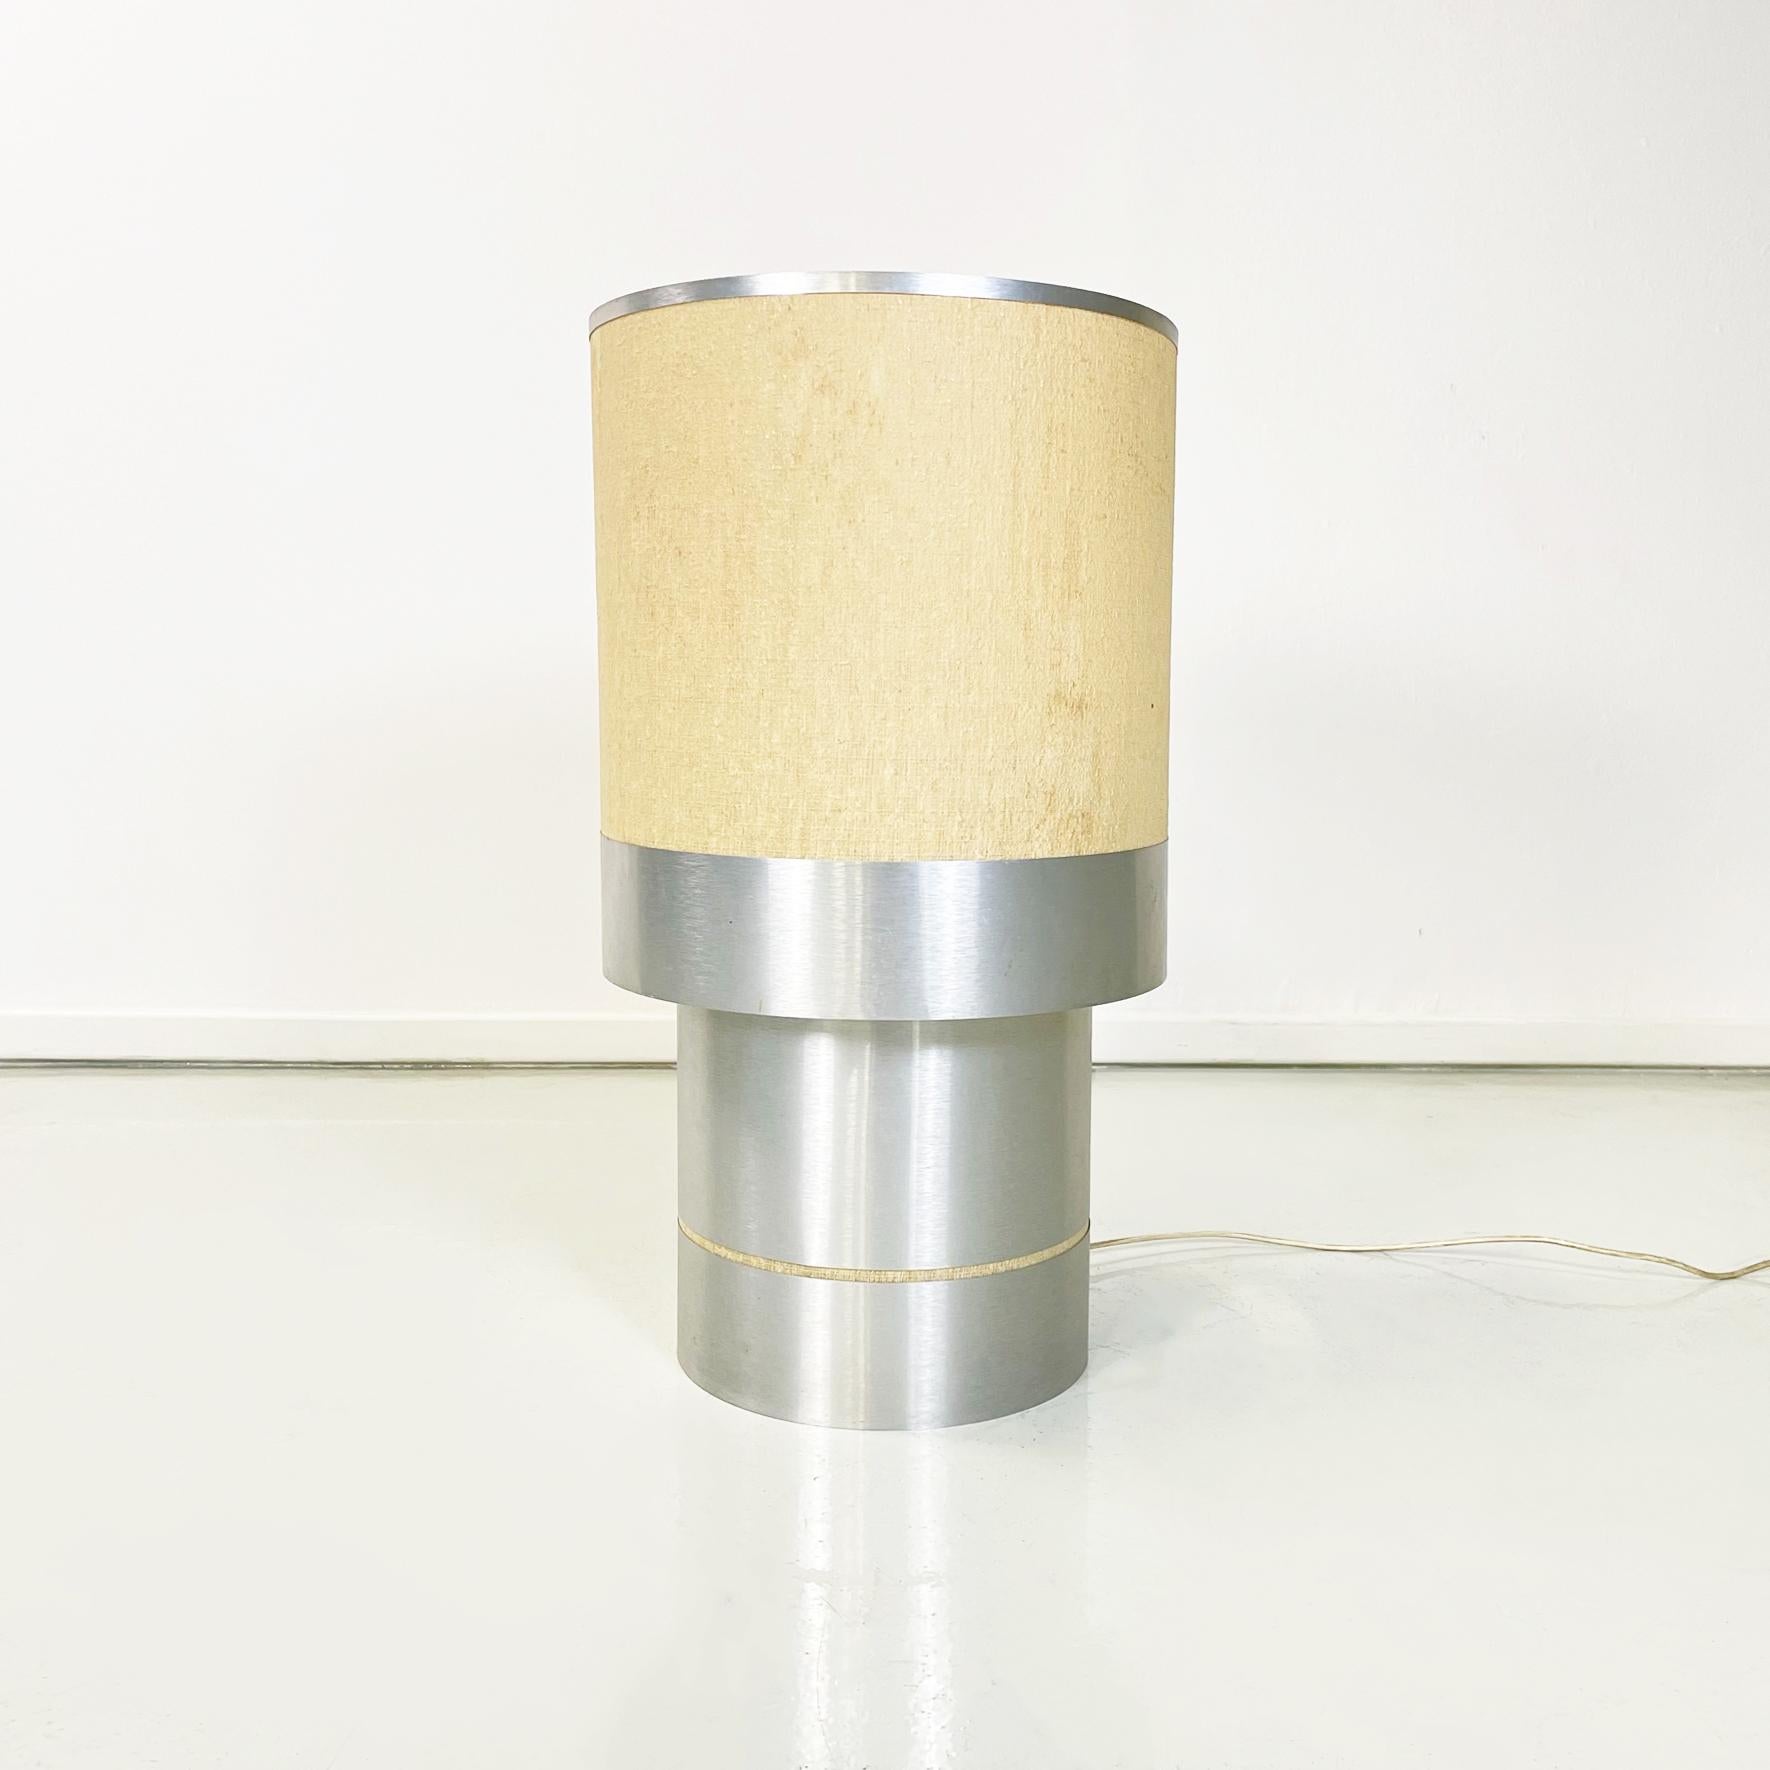 Mid-Century Modern Italian Mid-Century Table Lamp in Beige Fabric and Brushed Aluminum, 1960s For Sale